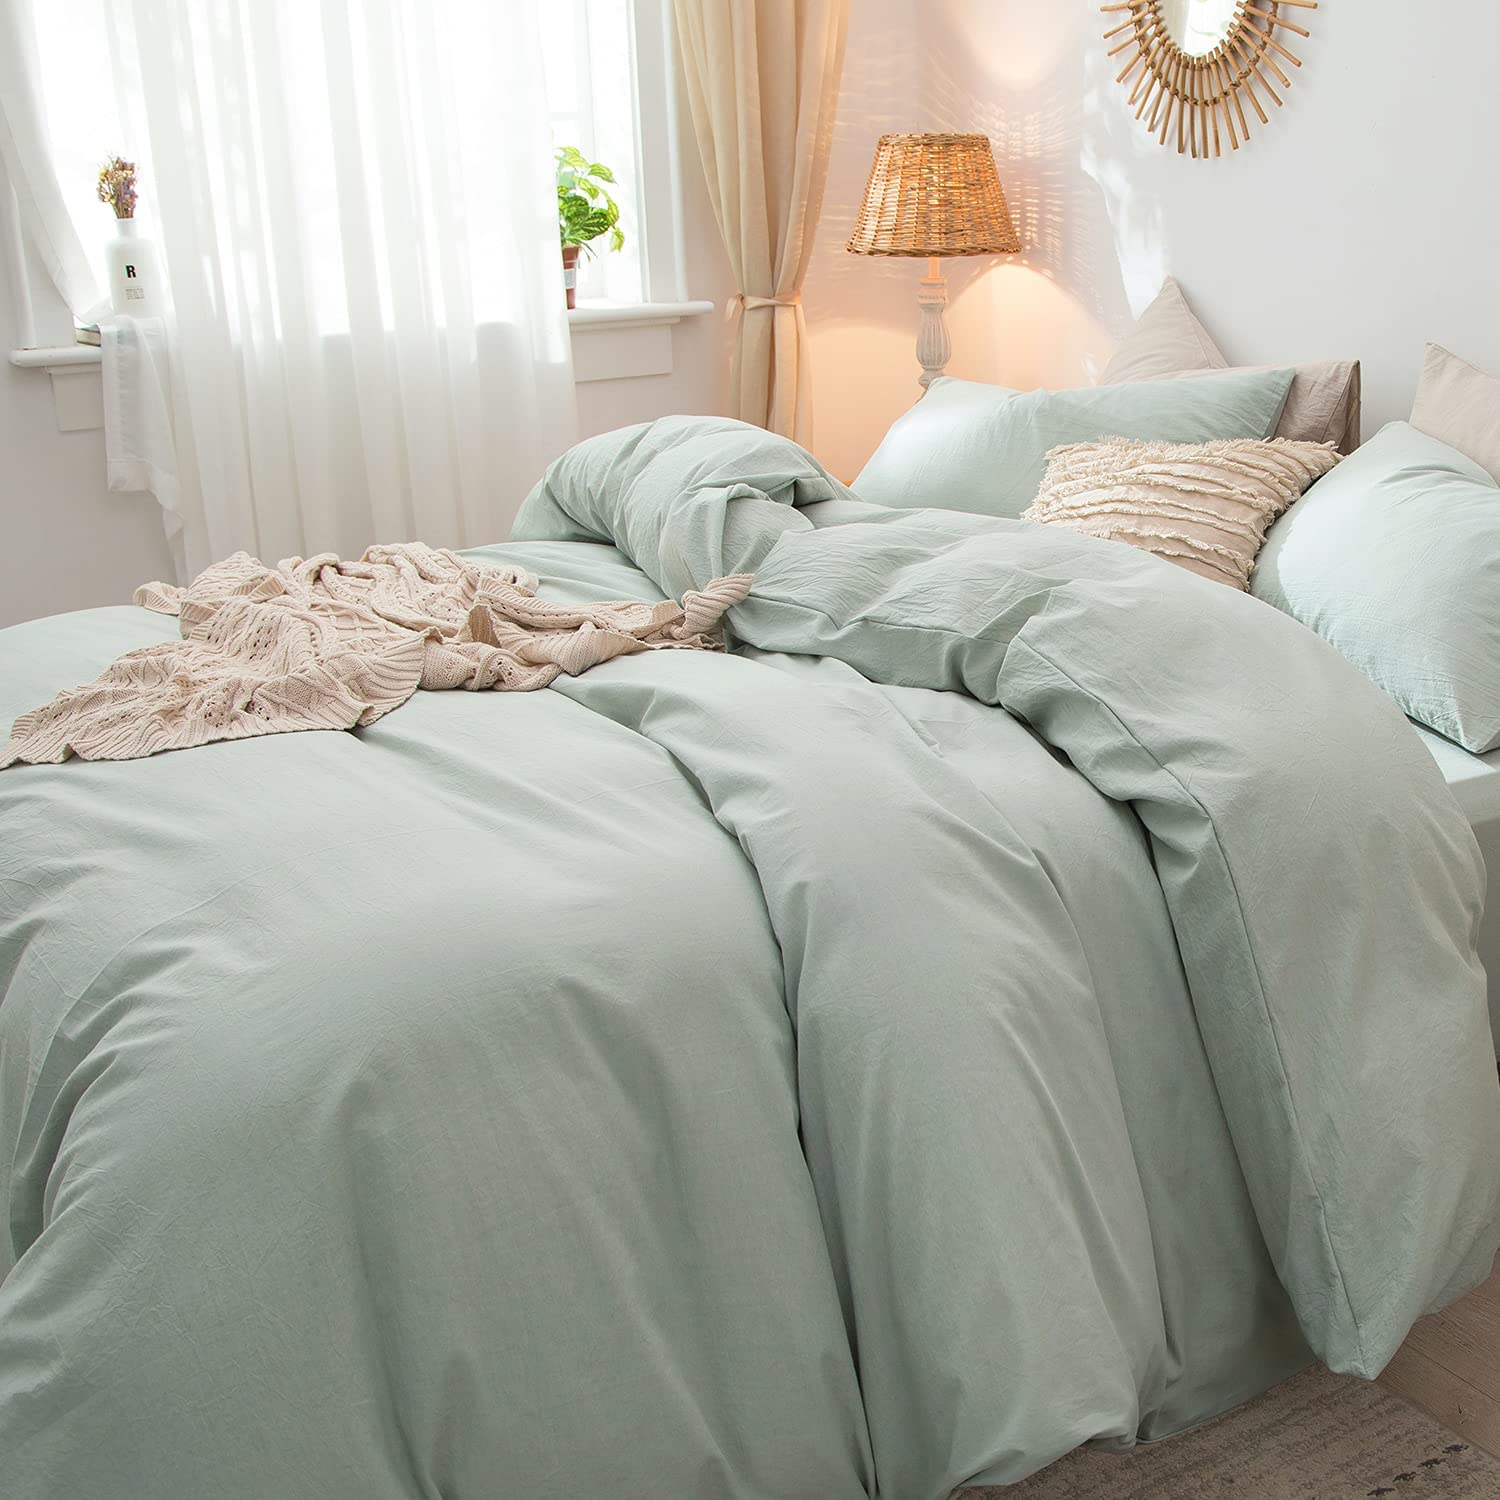 What Is A Duvet Cover Set?